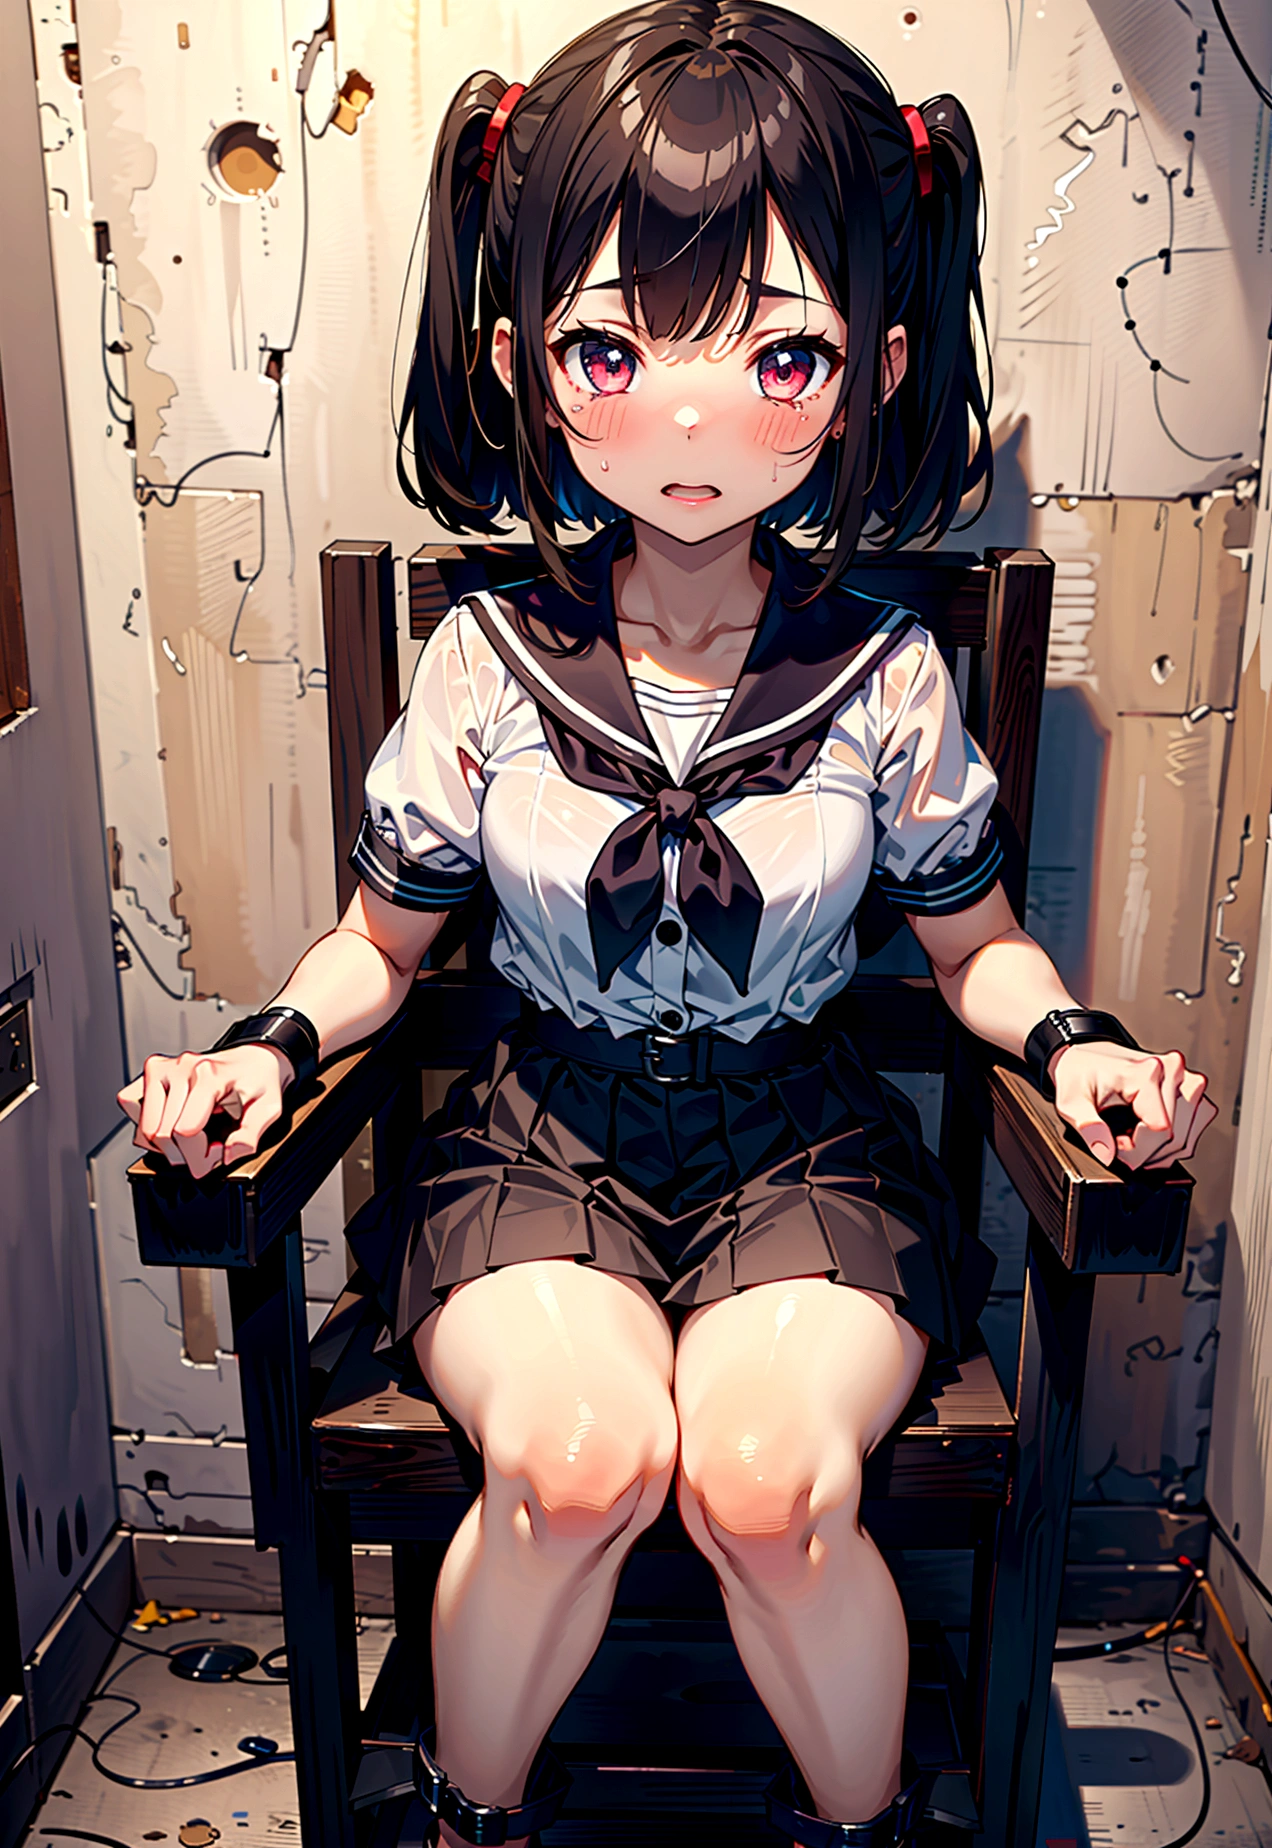 1 girl, (blushing, terrified, crying), tied to a chair, straped to chair, (tight clothing, short sleeve, mini-skirt, sailor uniform), (inside basement, underground), (wrist cuffs, ankle cuffs, wrists tied, ankles tied), perfect body, detailed face, detailed eyes, full body, image taken from afar